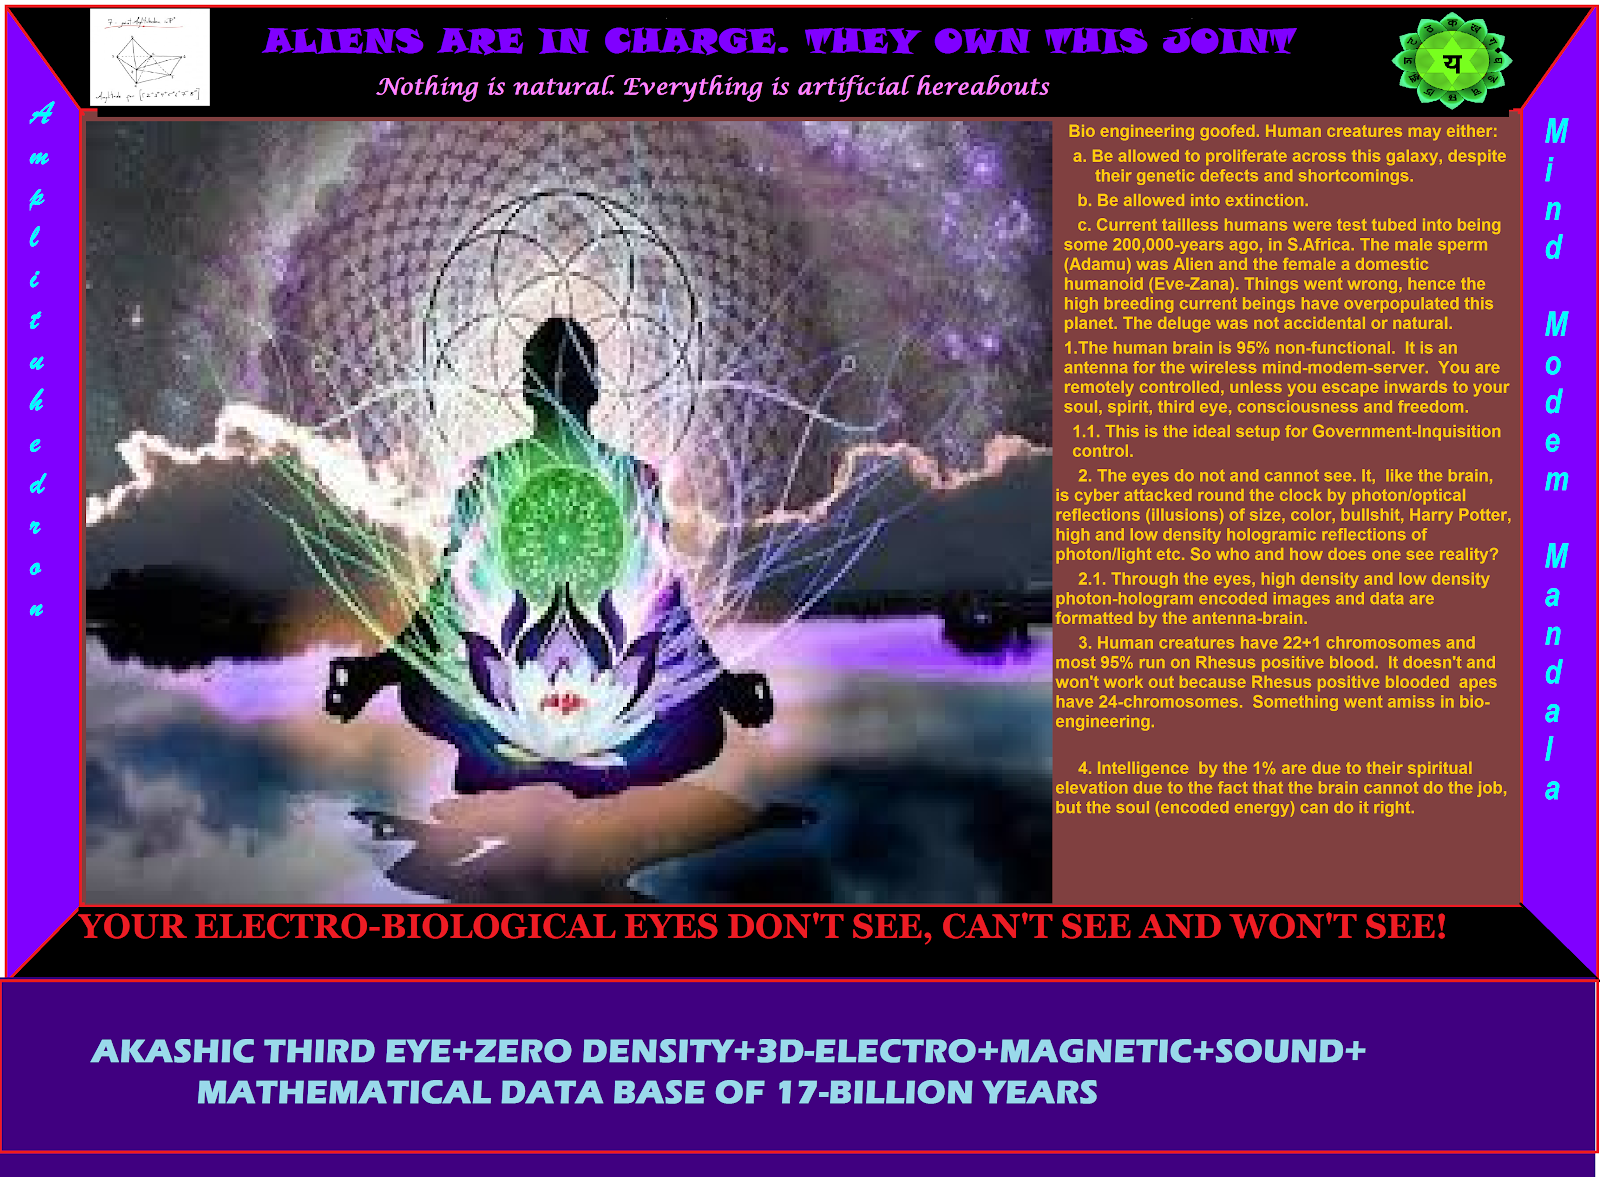 THE ELECTRO MAGNETIC THIRD EYE